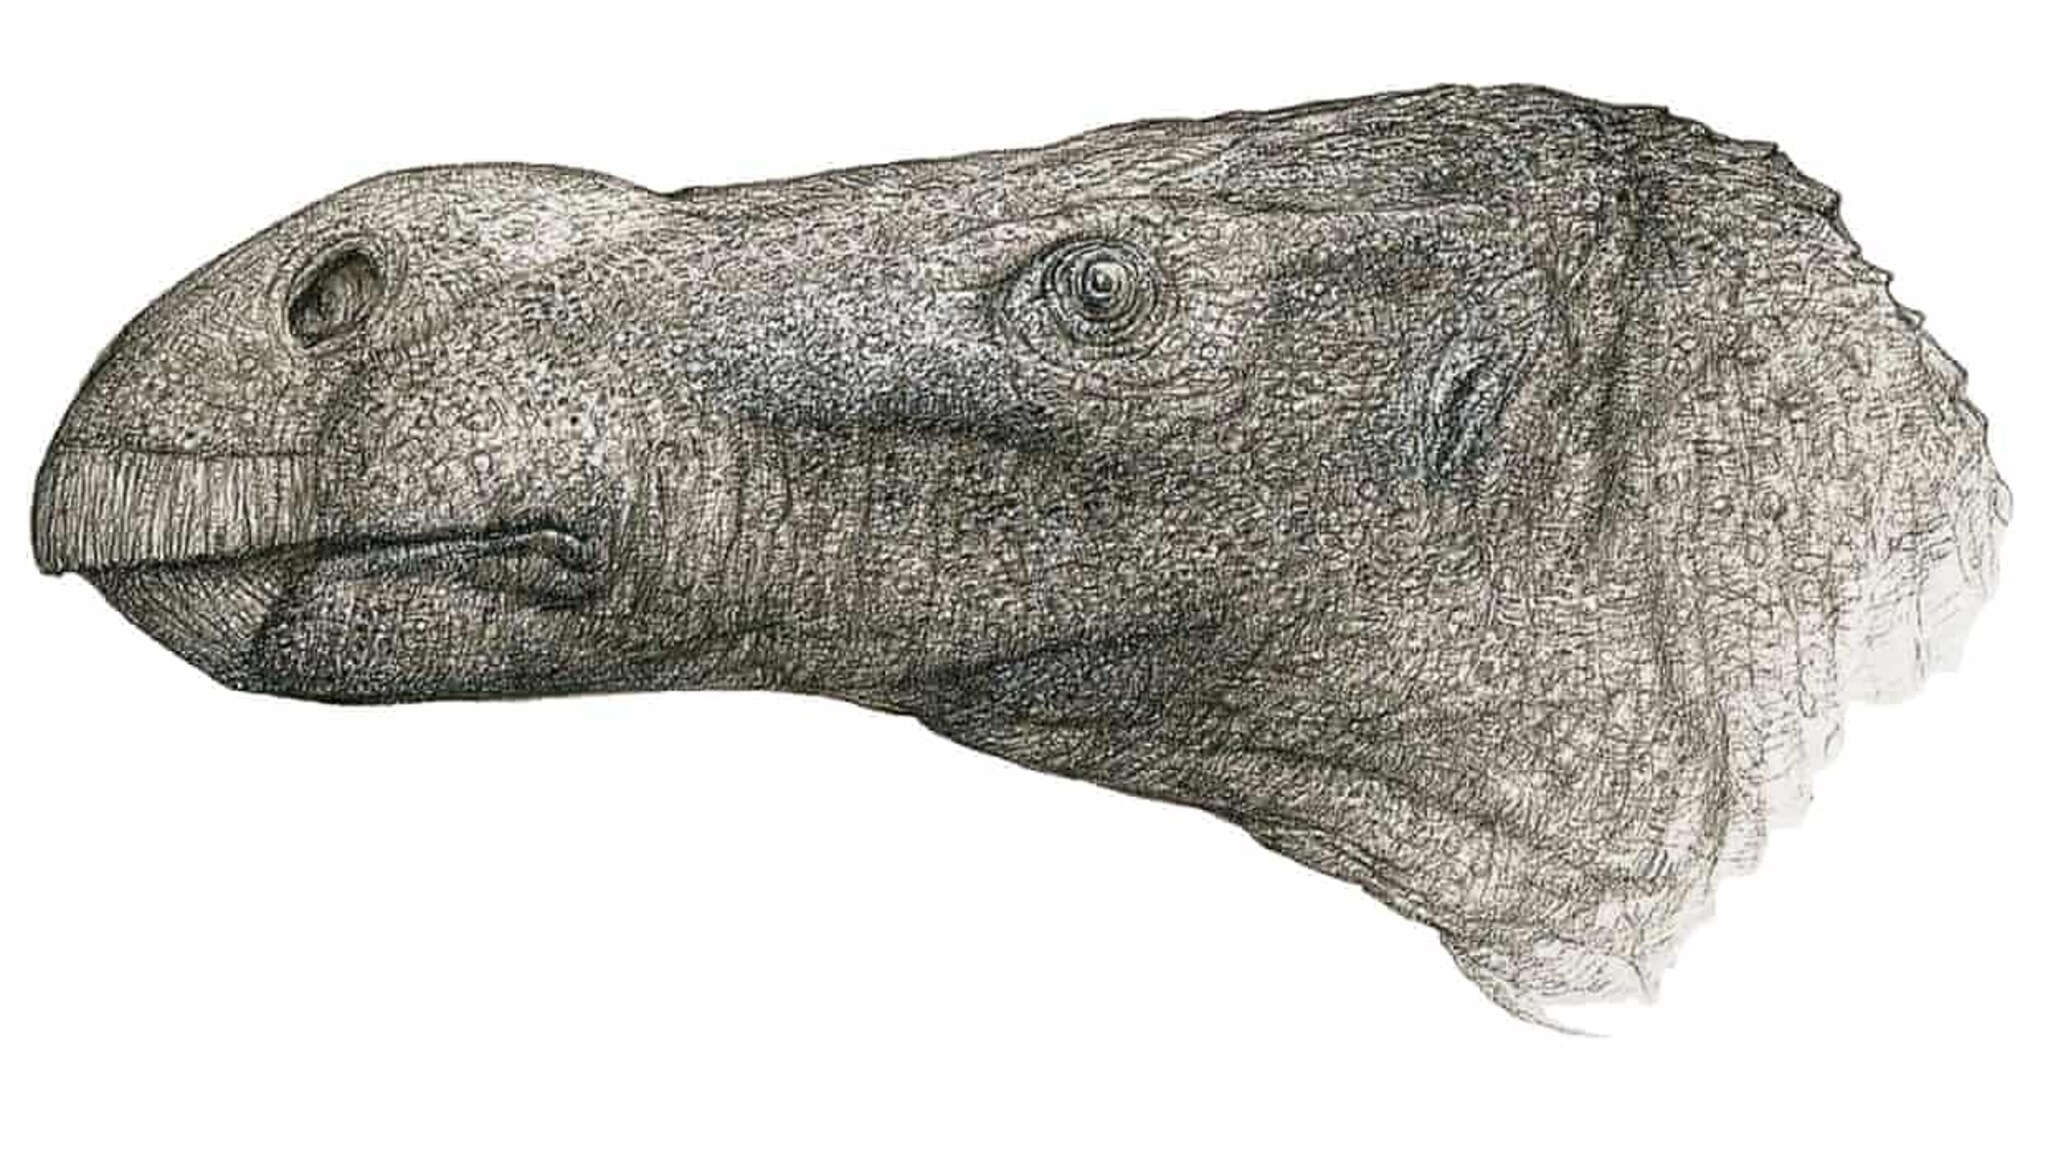 A new species of dinosaur with a huge nose has been discovered